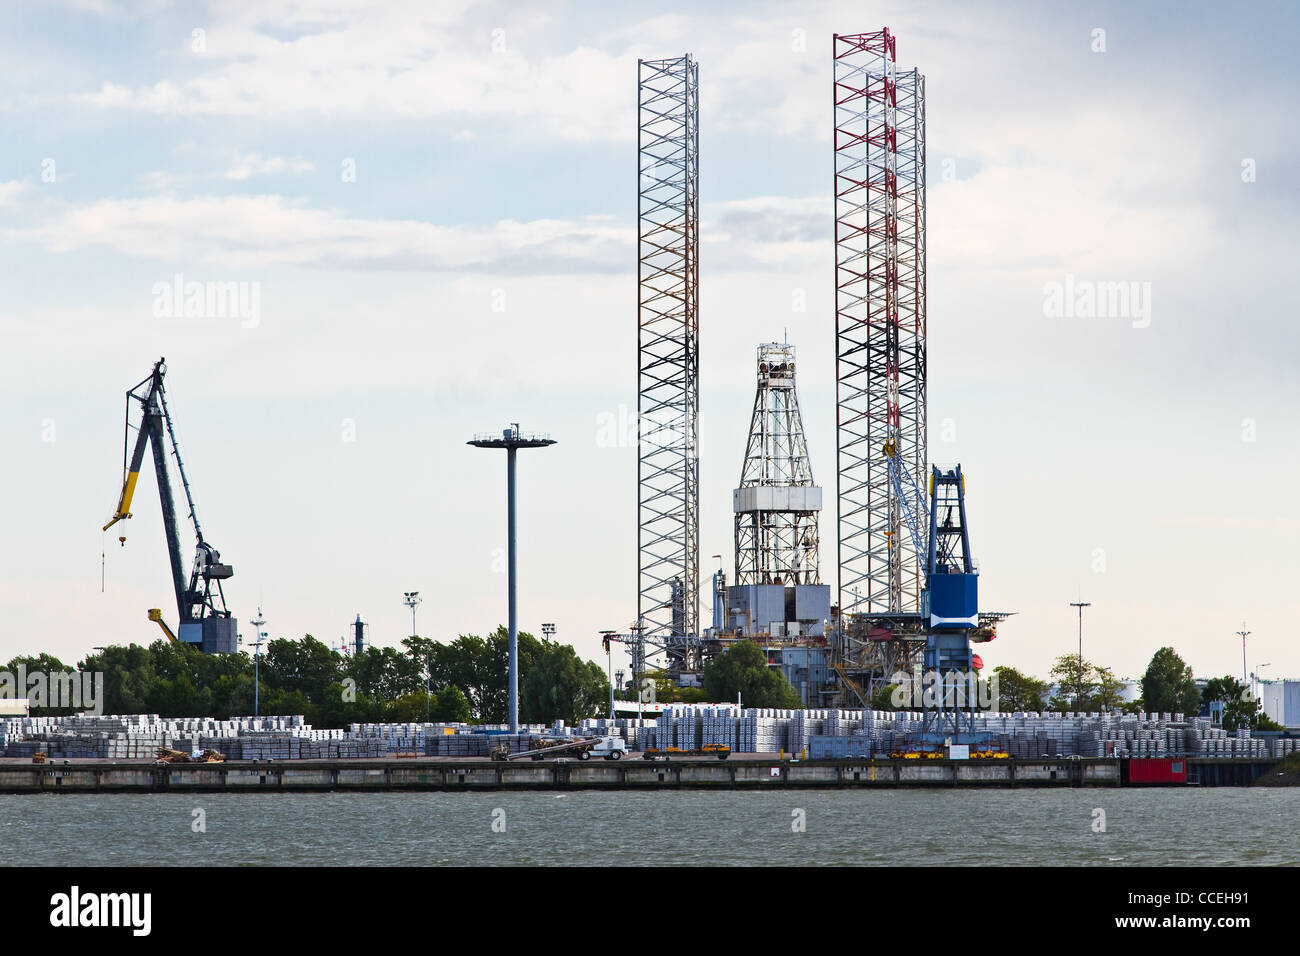 Industrial cranes and drilling platform in dock at the riverside Stock Photo